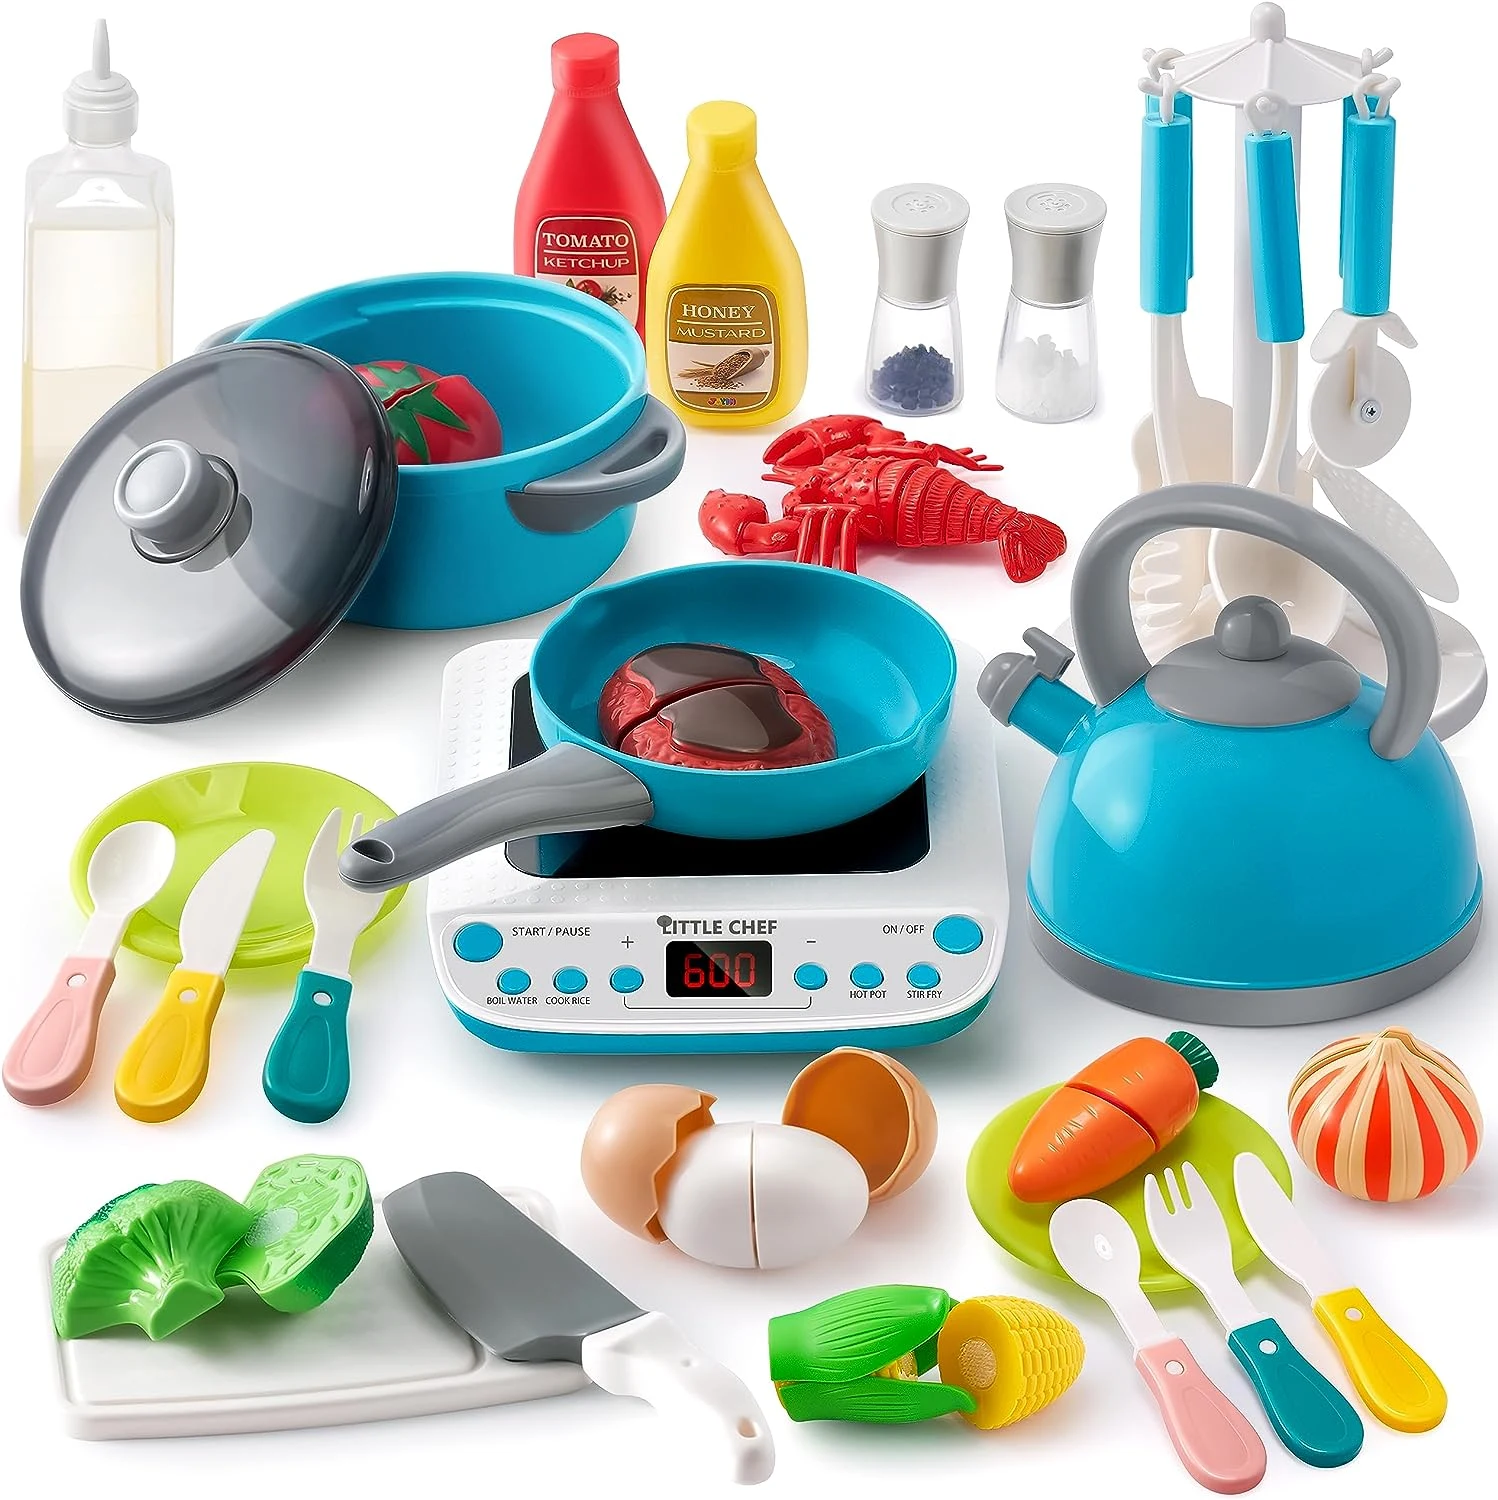  Cute Stone Kids Kitchen Pretend Play Toys,Play Cooking